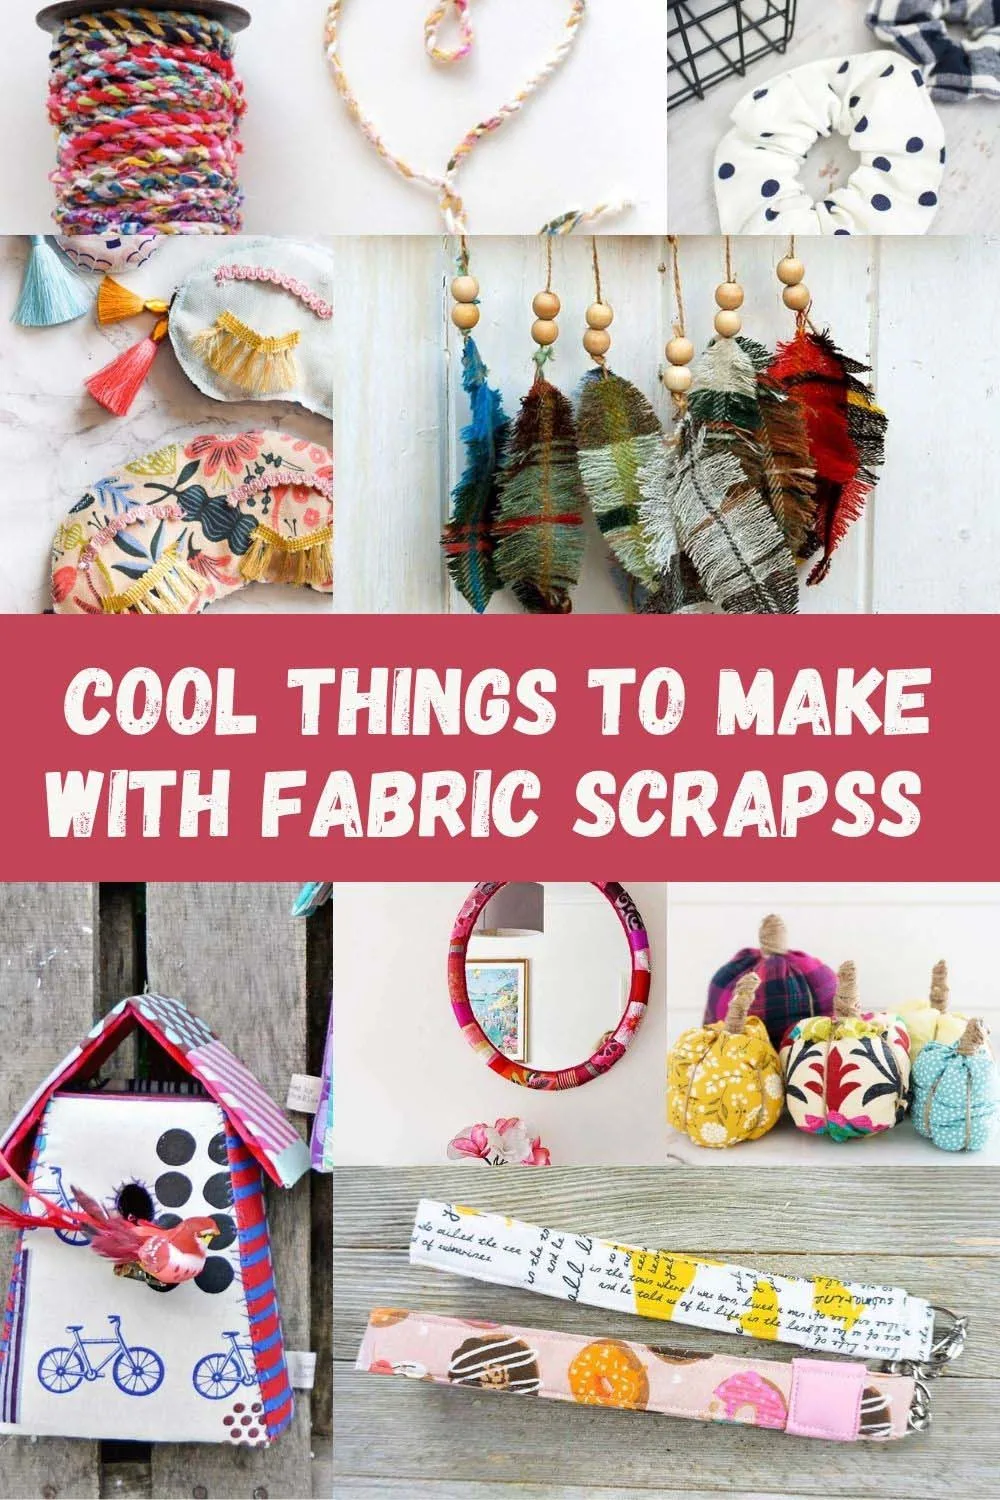 100+ Cool Scrap Fabric Projects (upcycle leftovers) - DIY & Crafts